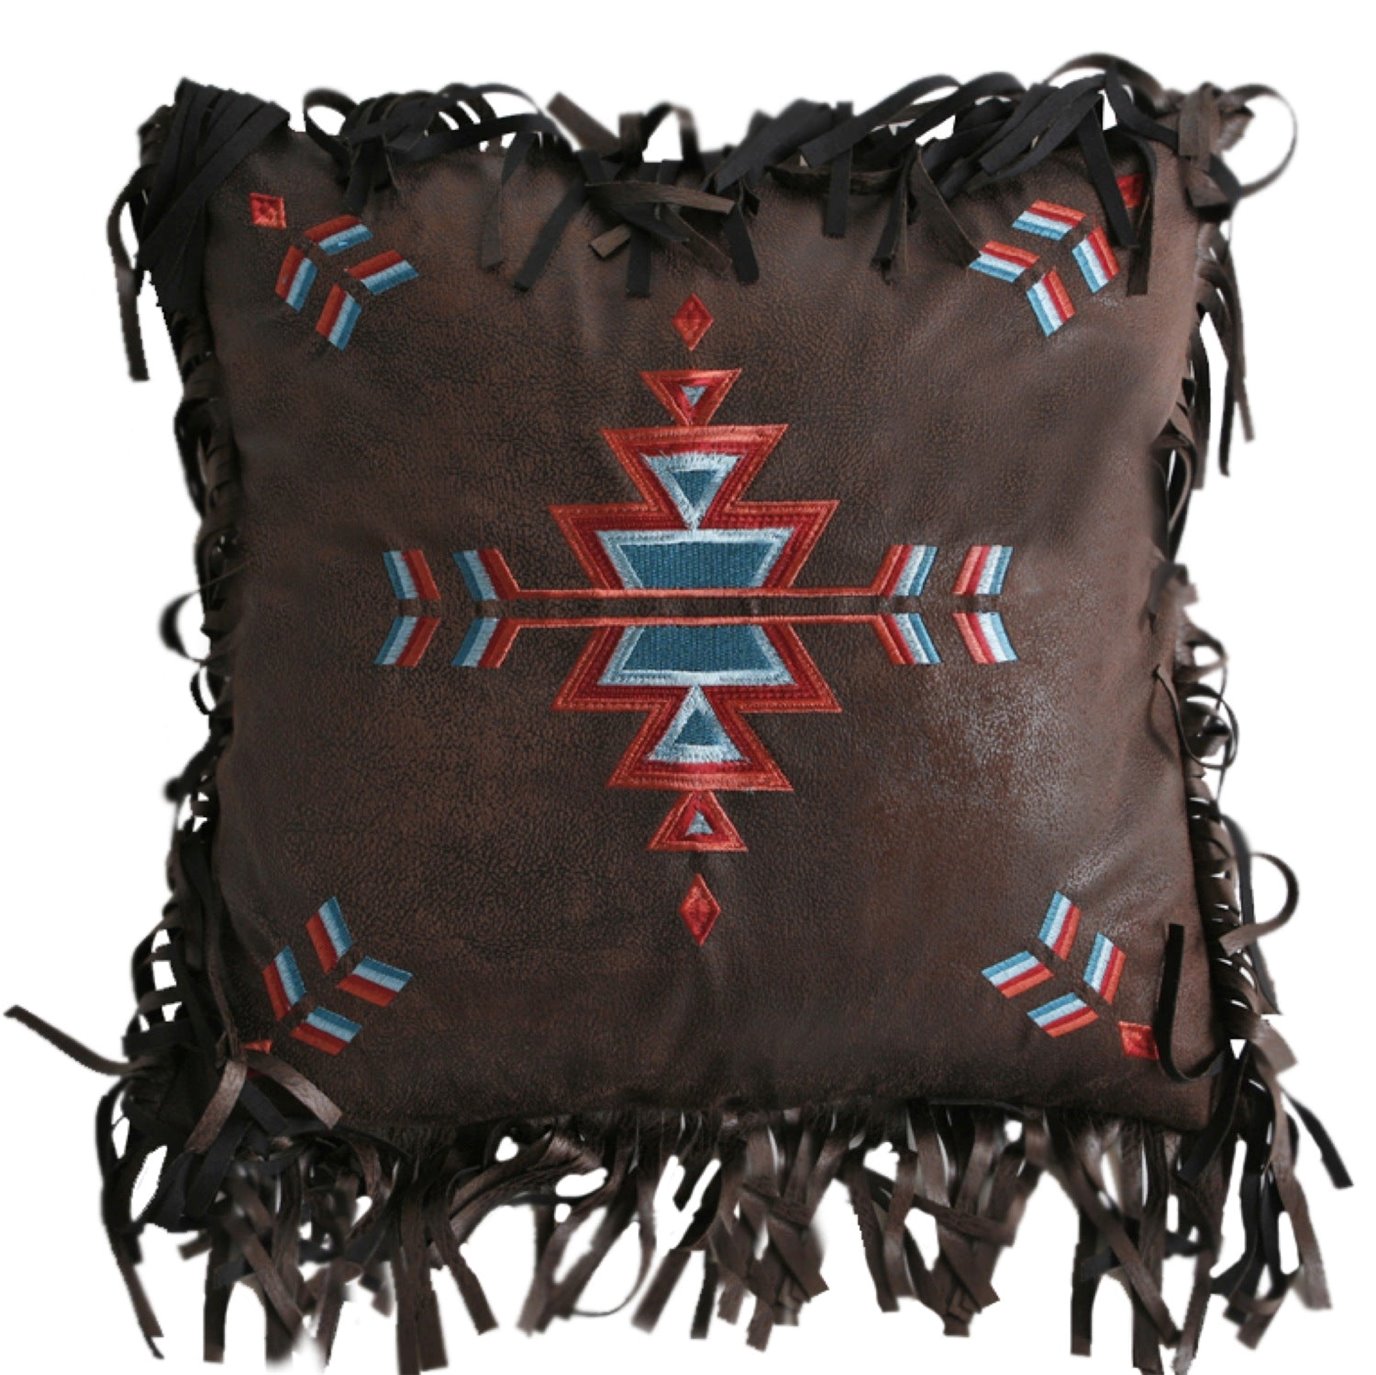 SW Embroidered Cross pillow